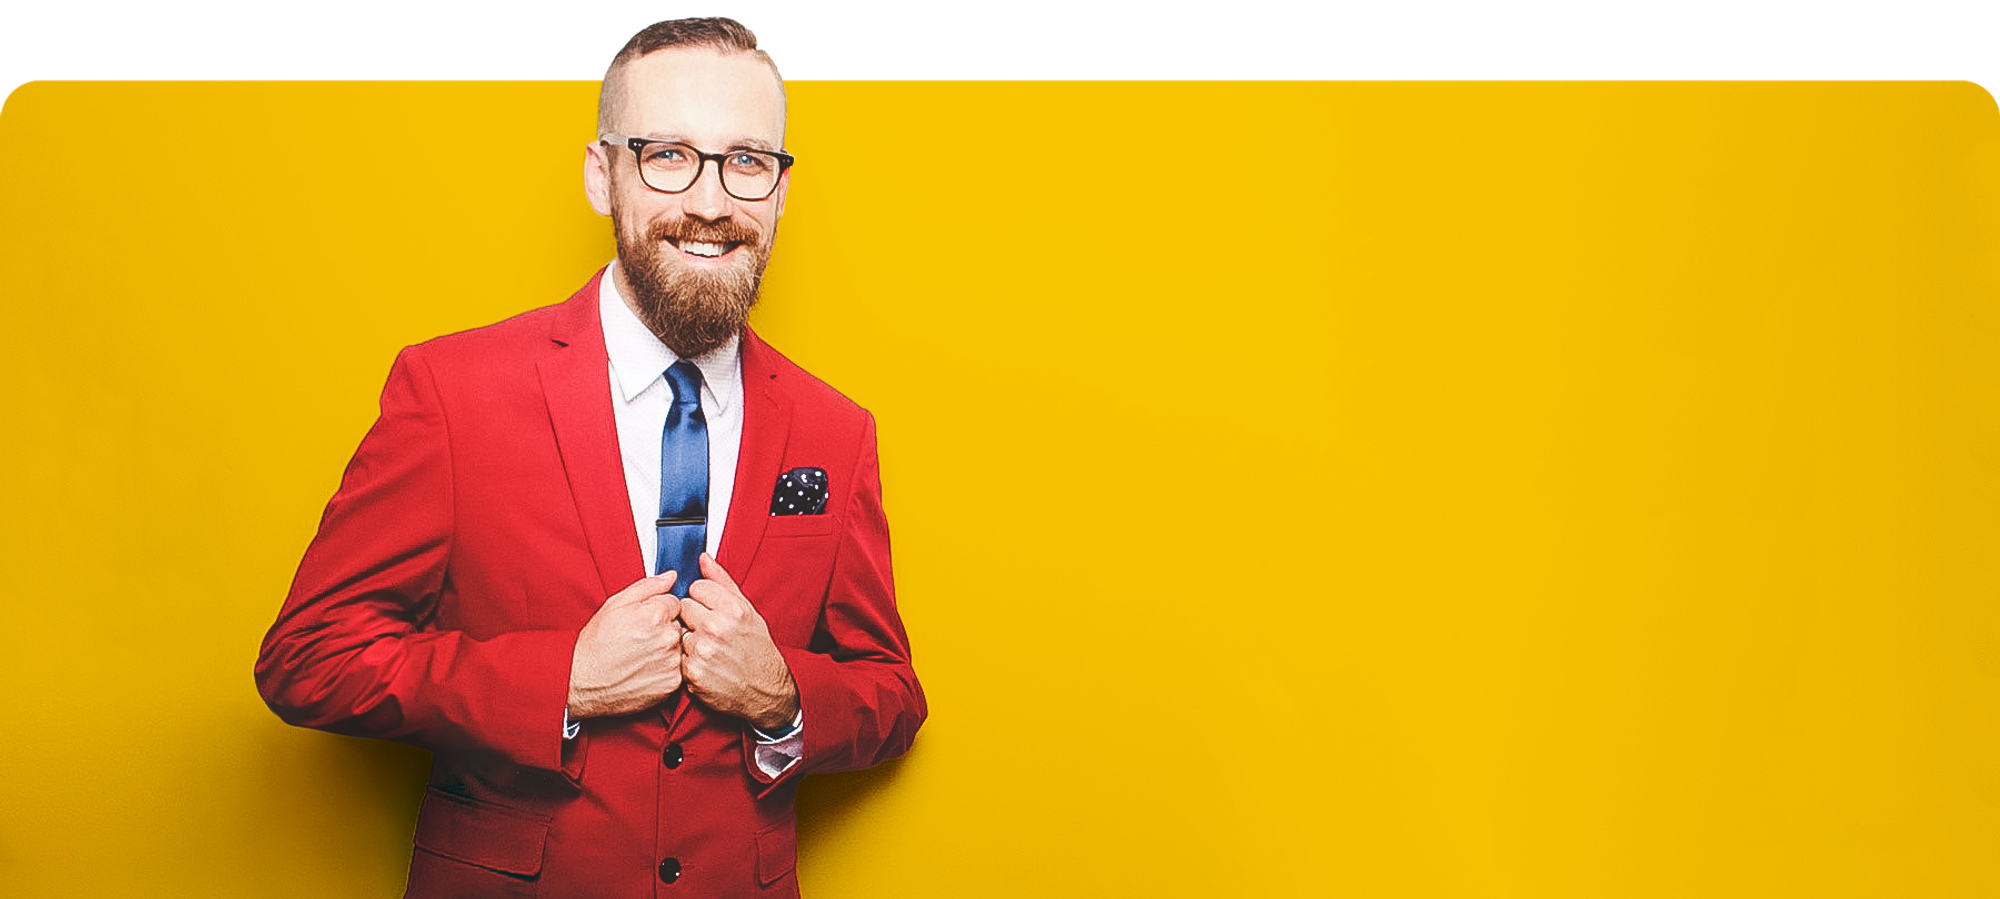 Profile photo of Nick Frühling in a red jacket on a yellow backdrop